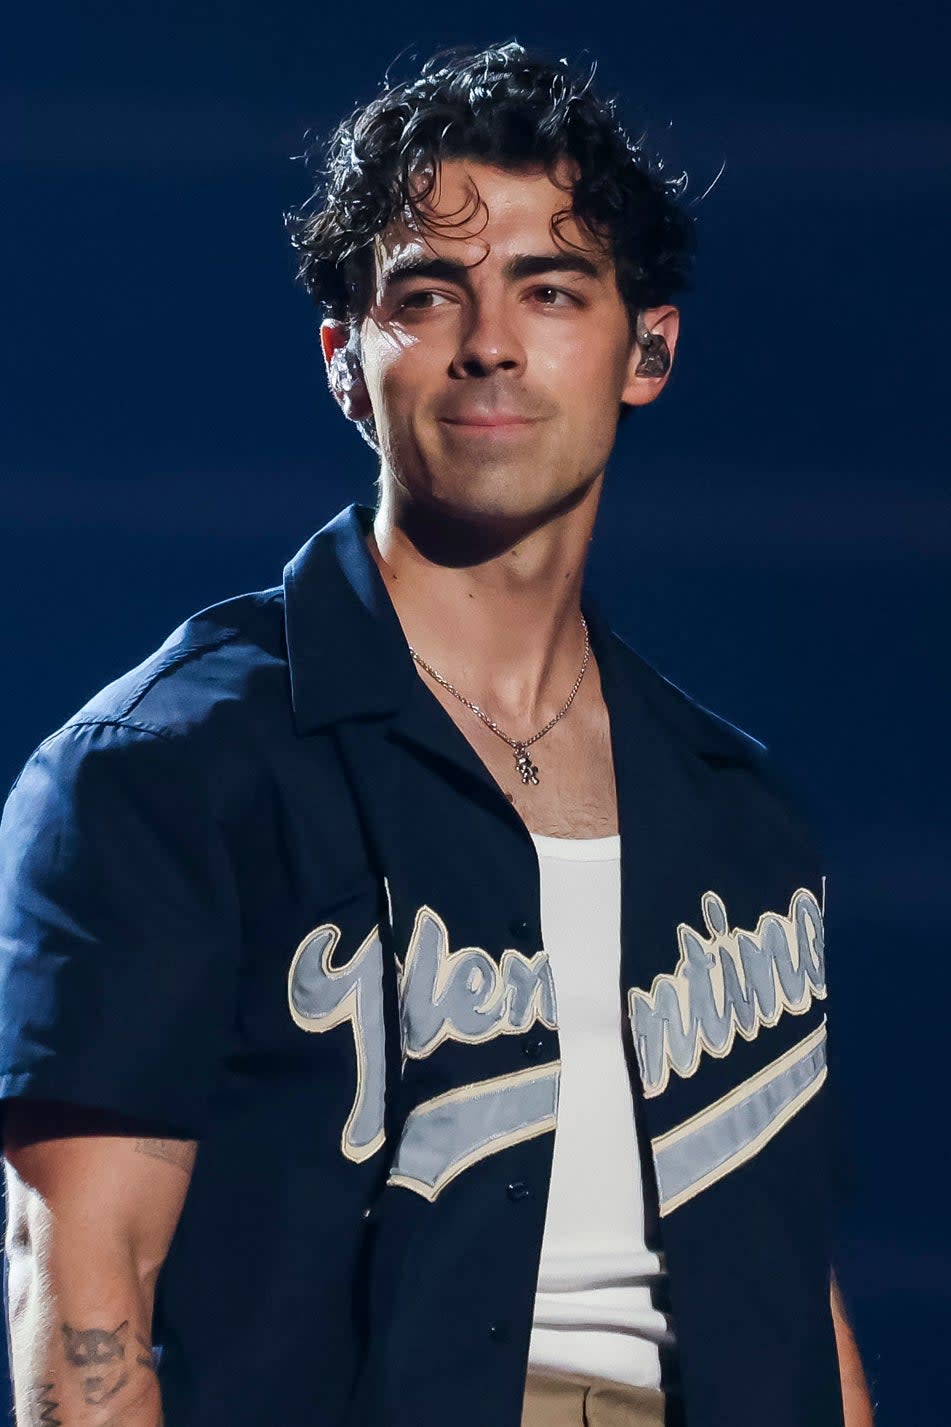 Joe Jonas in a varsity jacket and beige pants performing on stage with a microphone